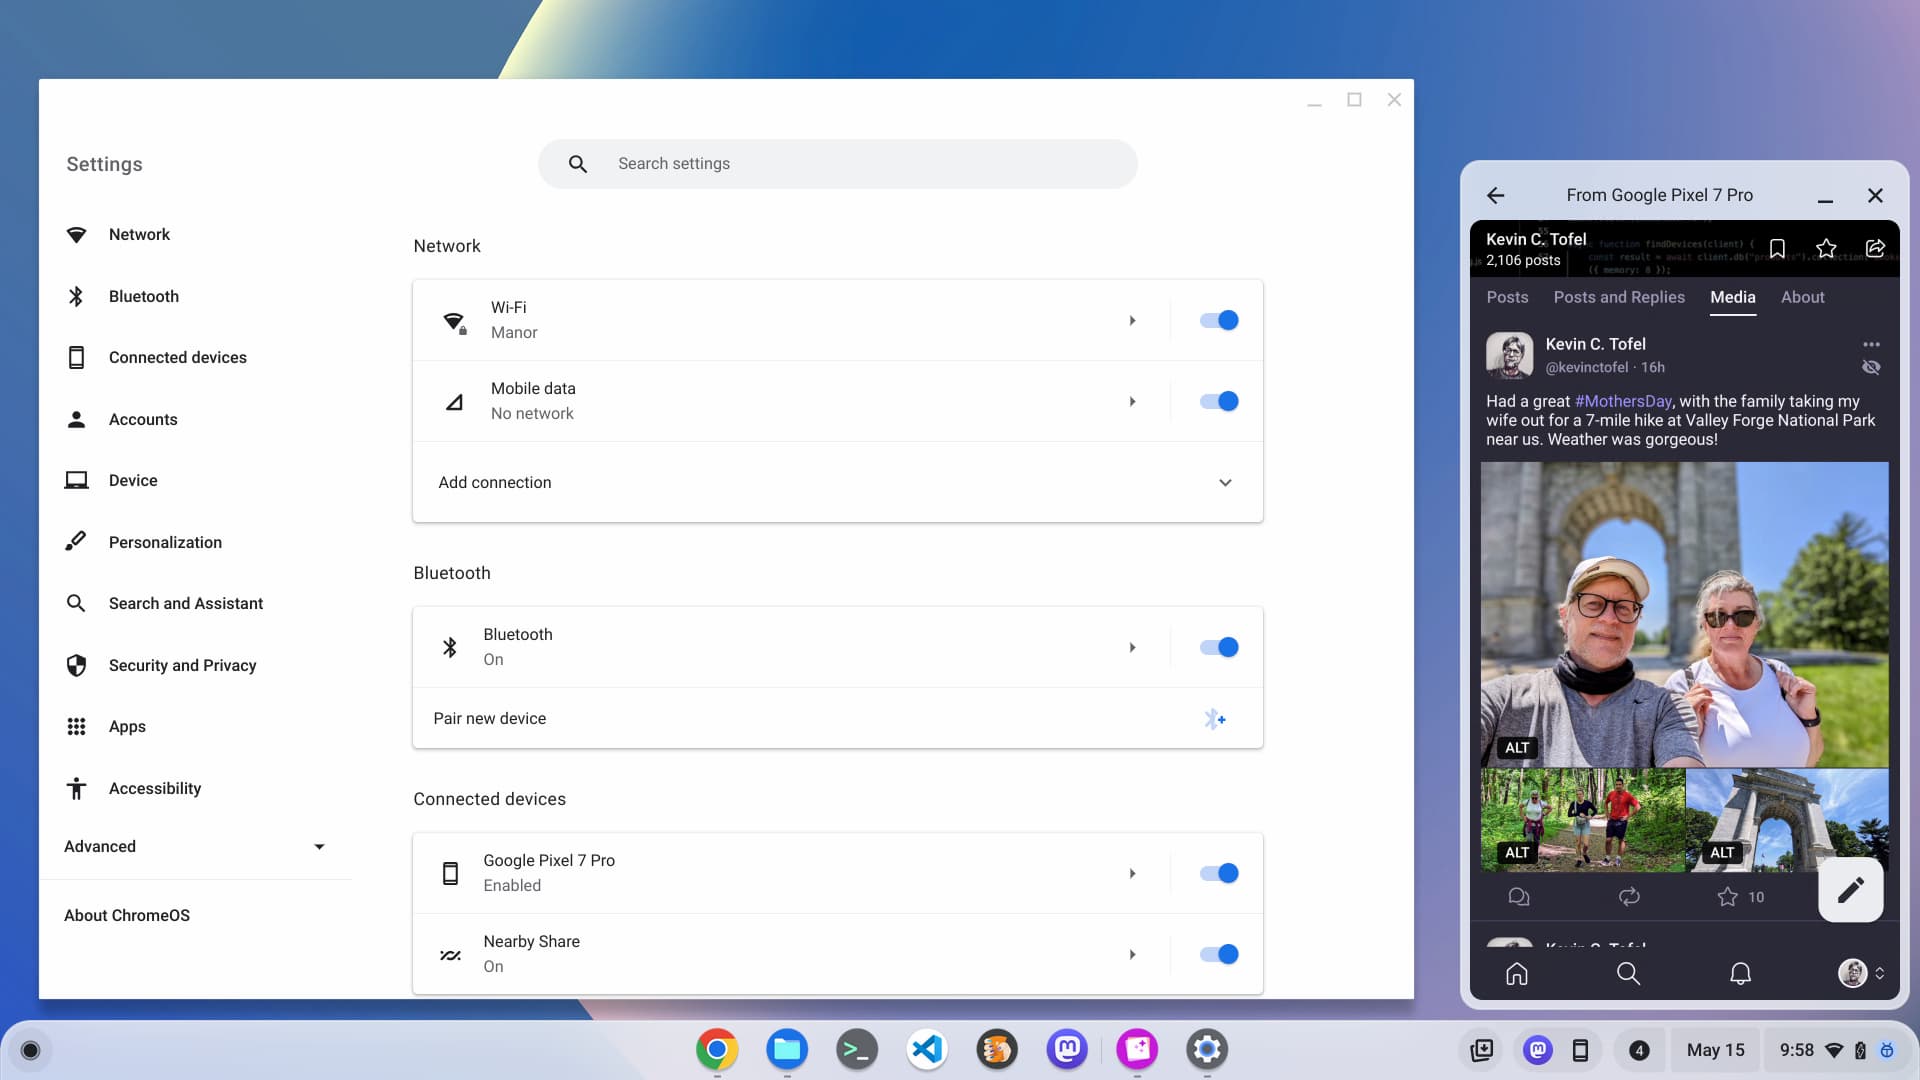 Android app streaming arrives in the ChromeOS 115 release as a new Chromebook feature.